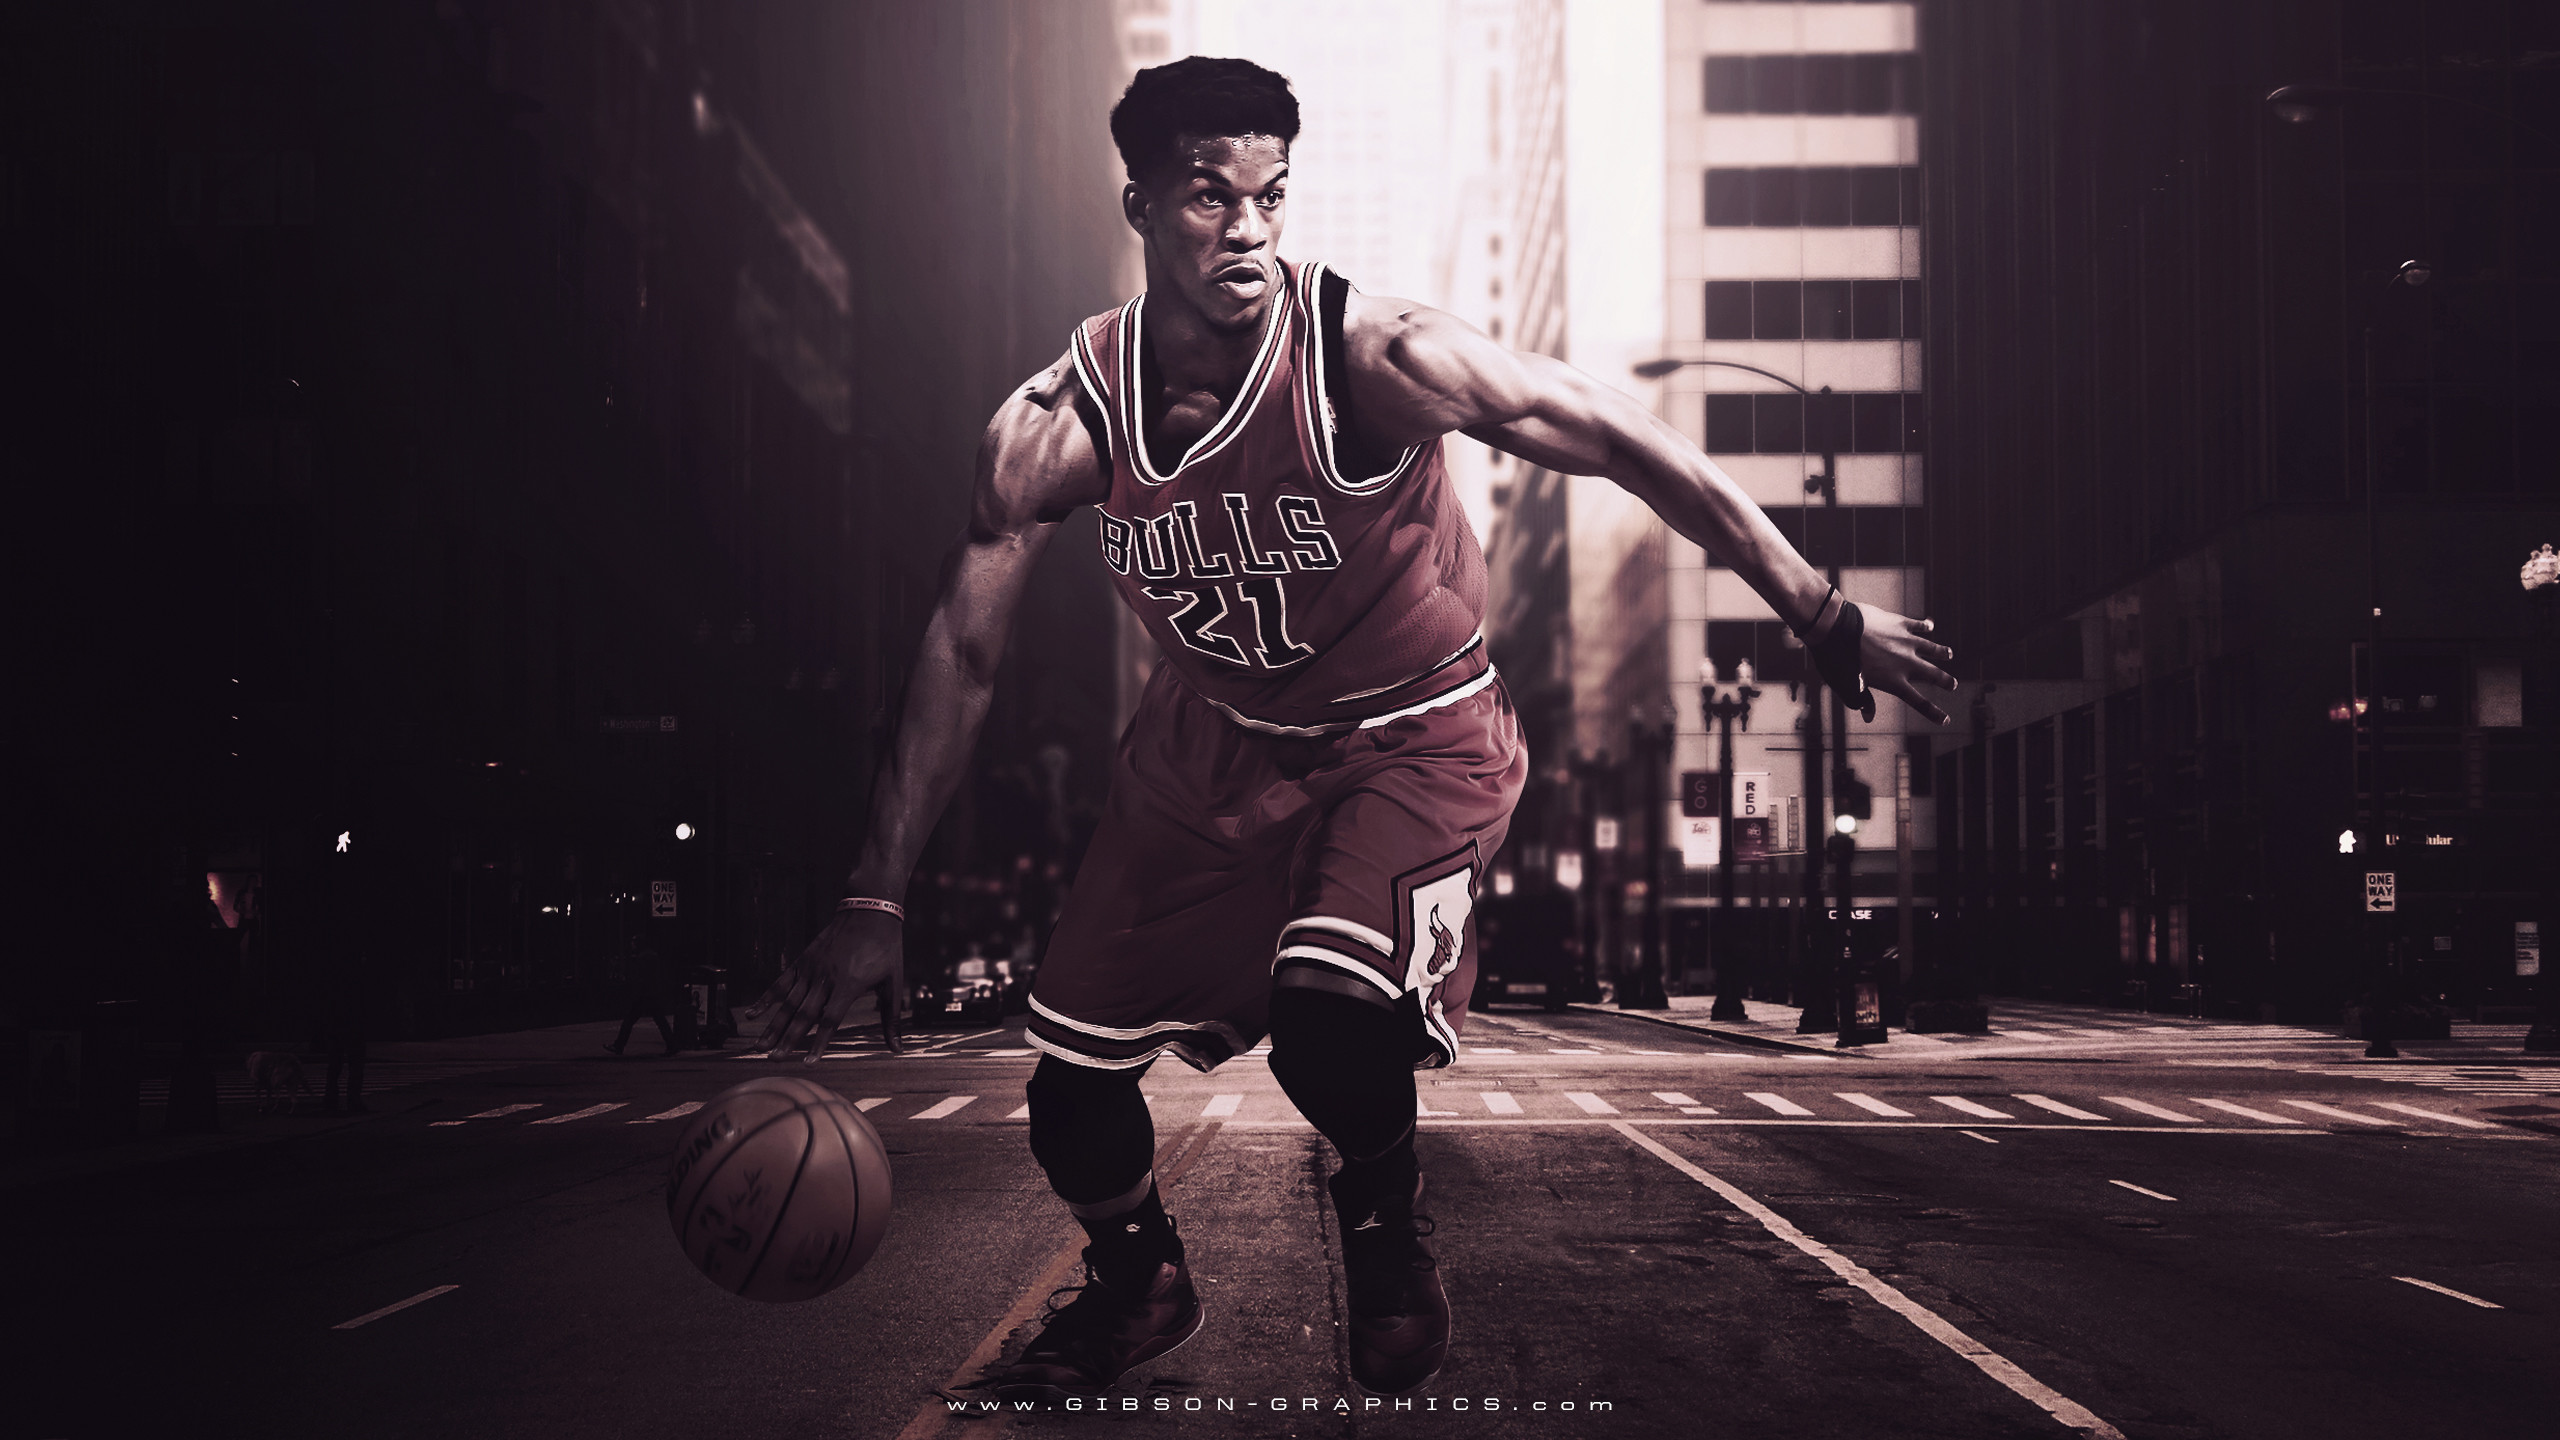 HoopsWallpaperscom  Get the latest HD and mobile NBA wallpapers today Jimmy  Butler Archives  HoopsWallpaperscom  Get the latest HD and mobile NBA  wallpapers today